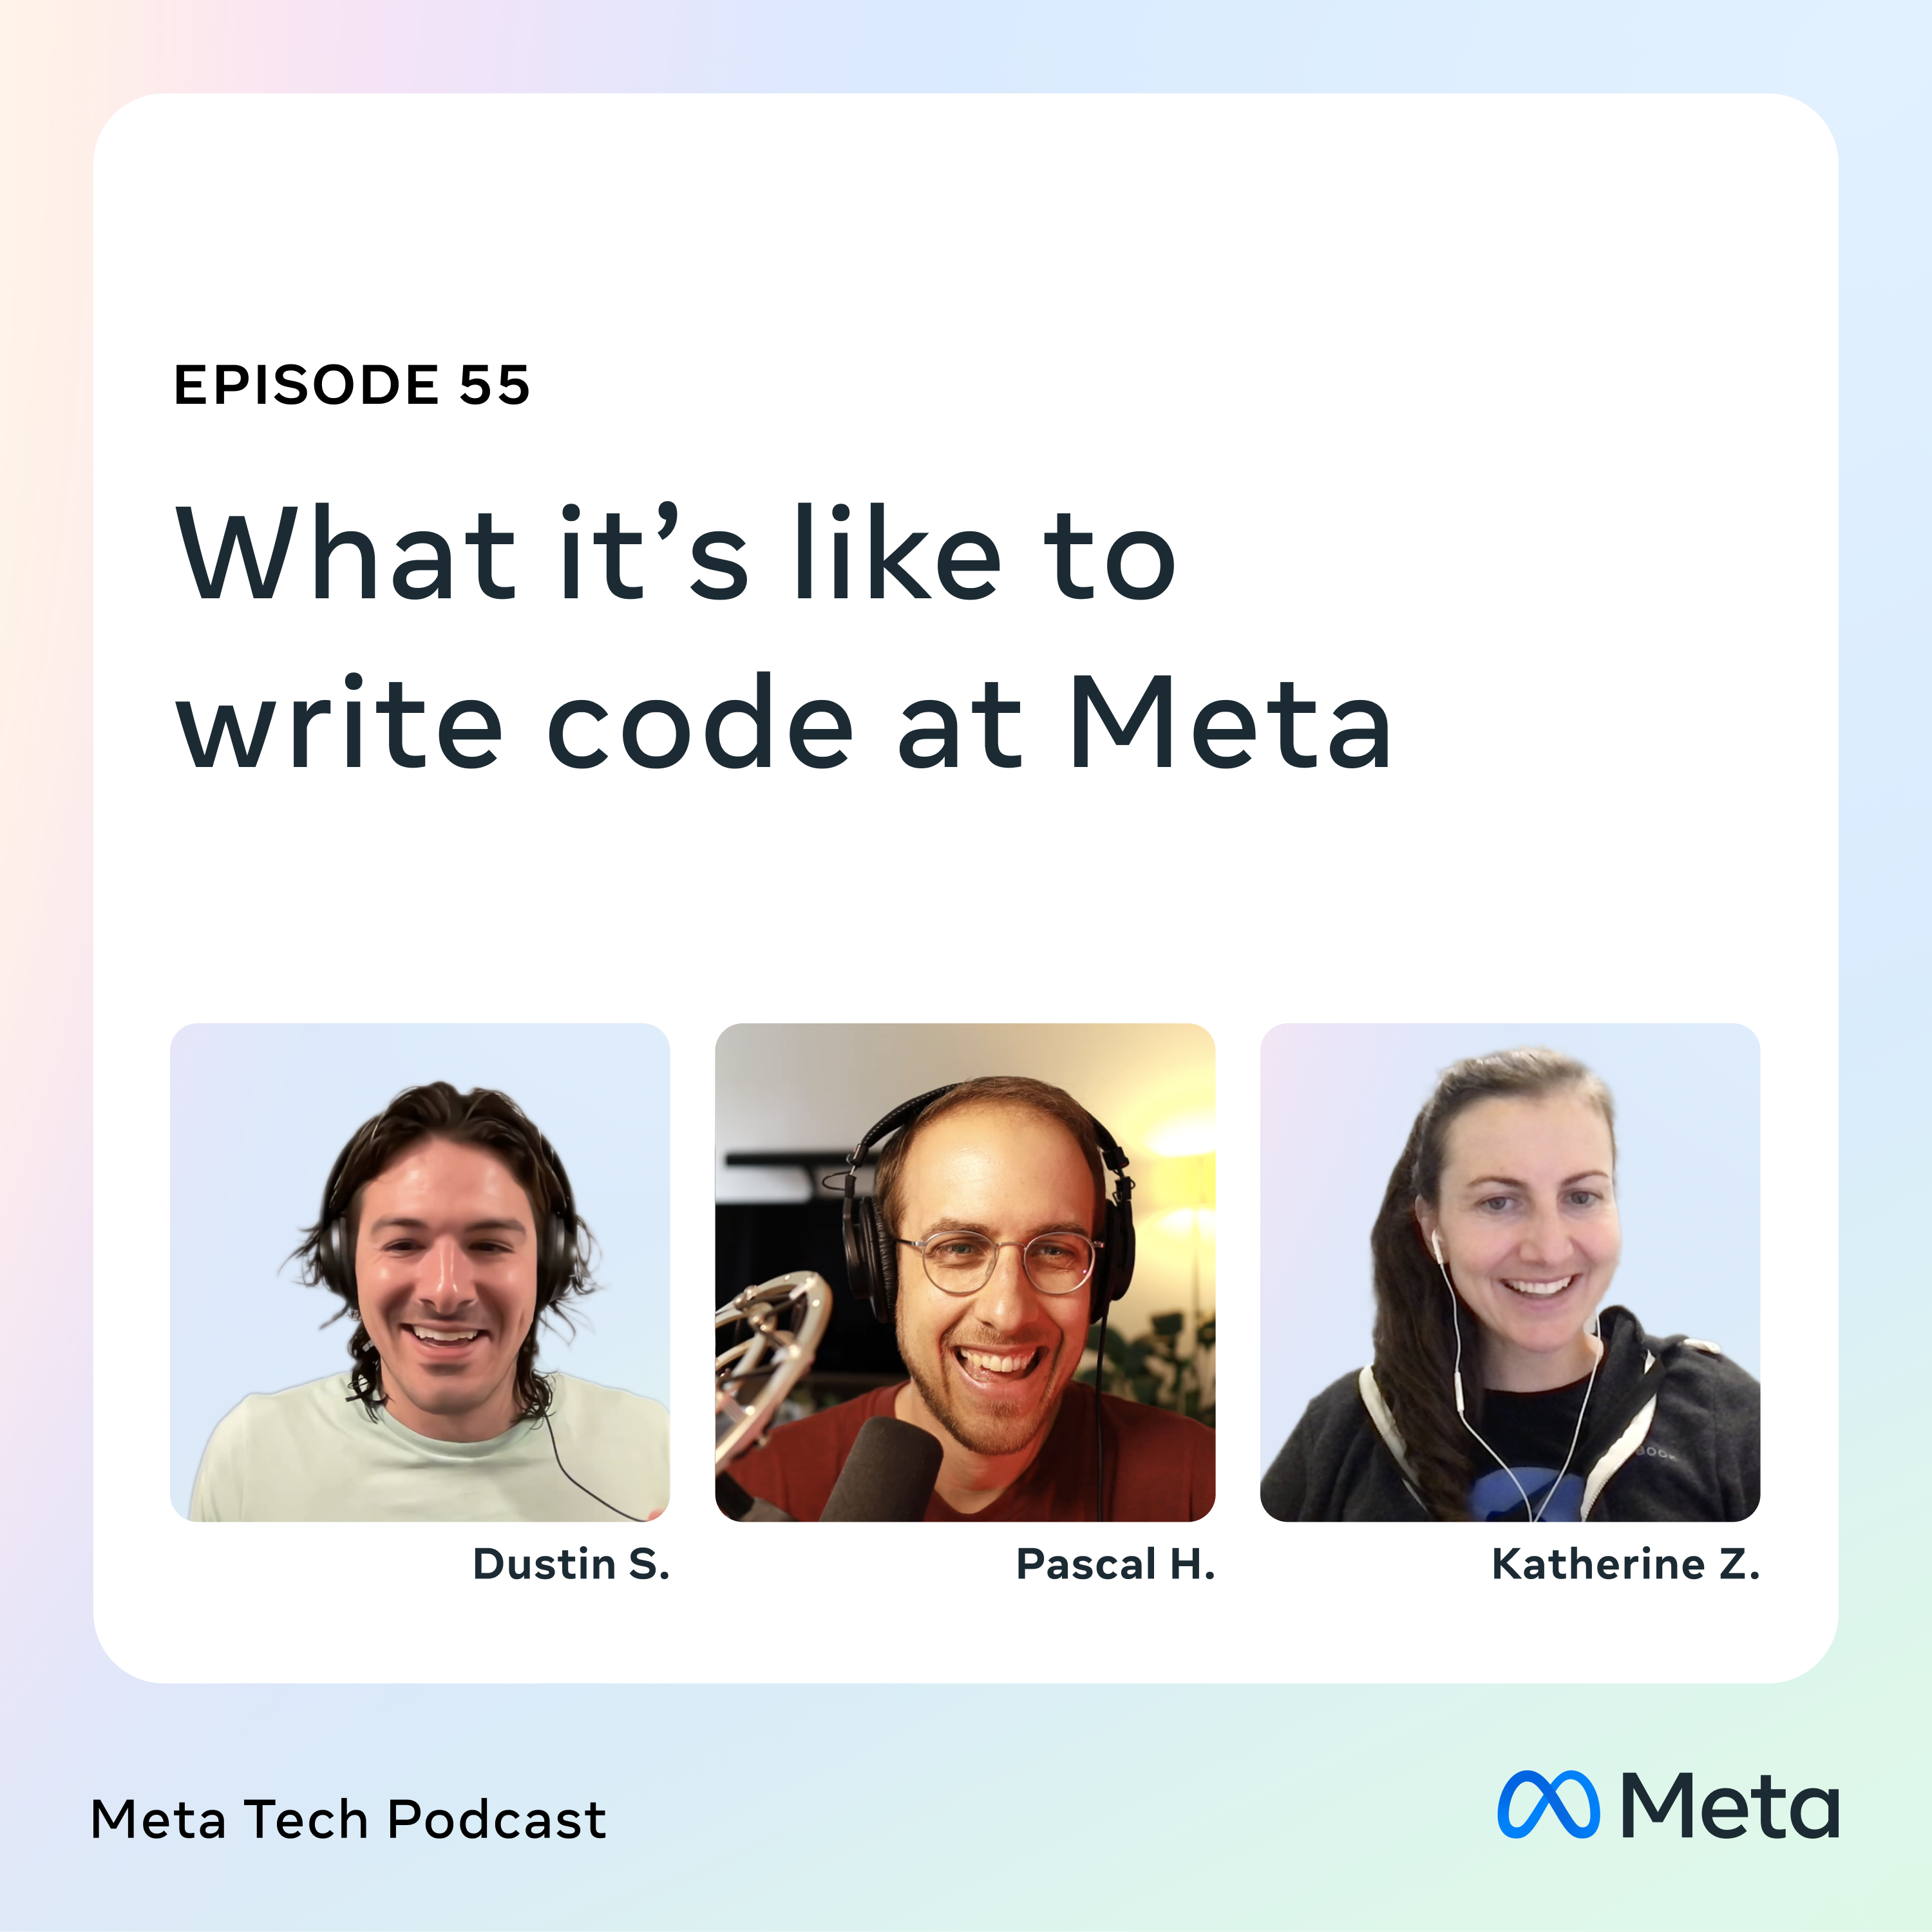 Meta Tech Podcast: What's it like to code at Meta?